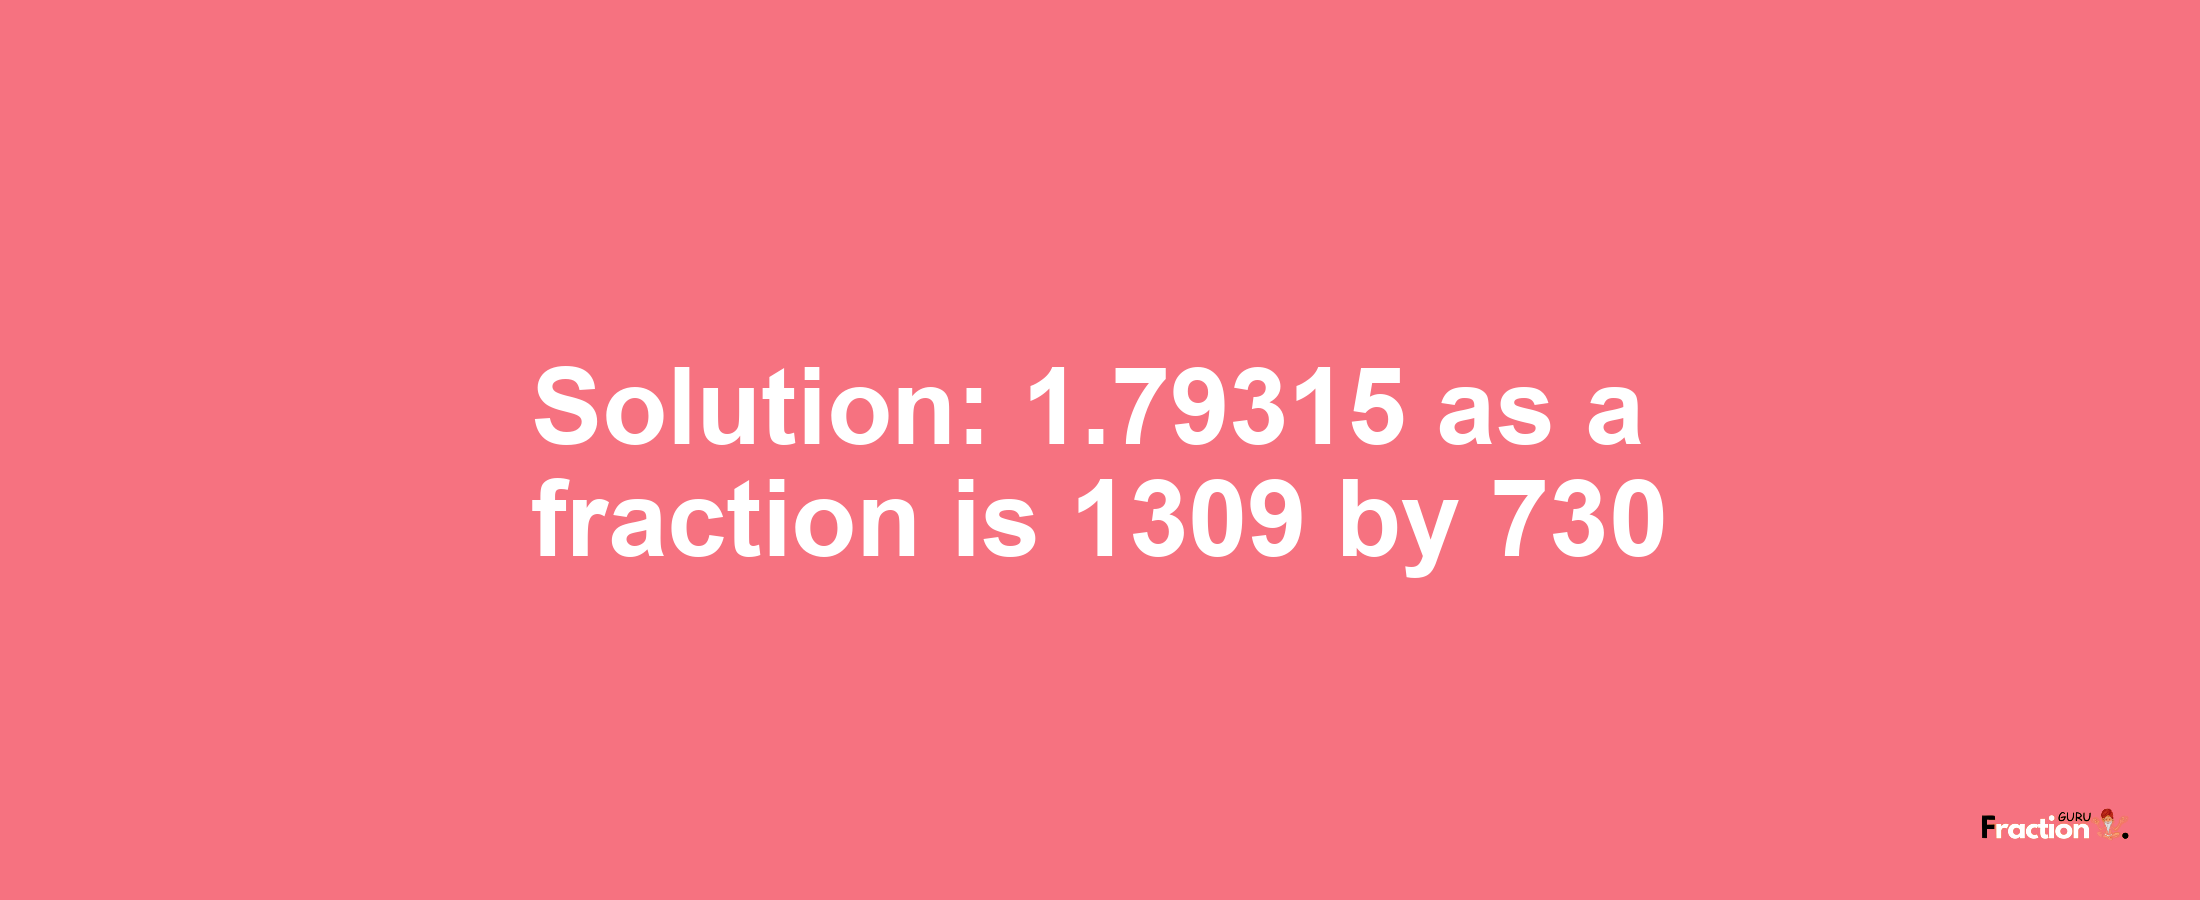 Solution:1.79315 as a fraction is 1309/730